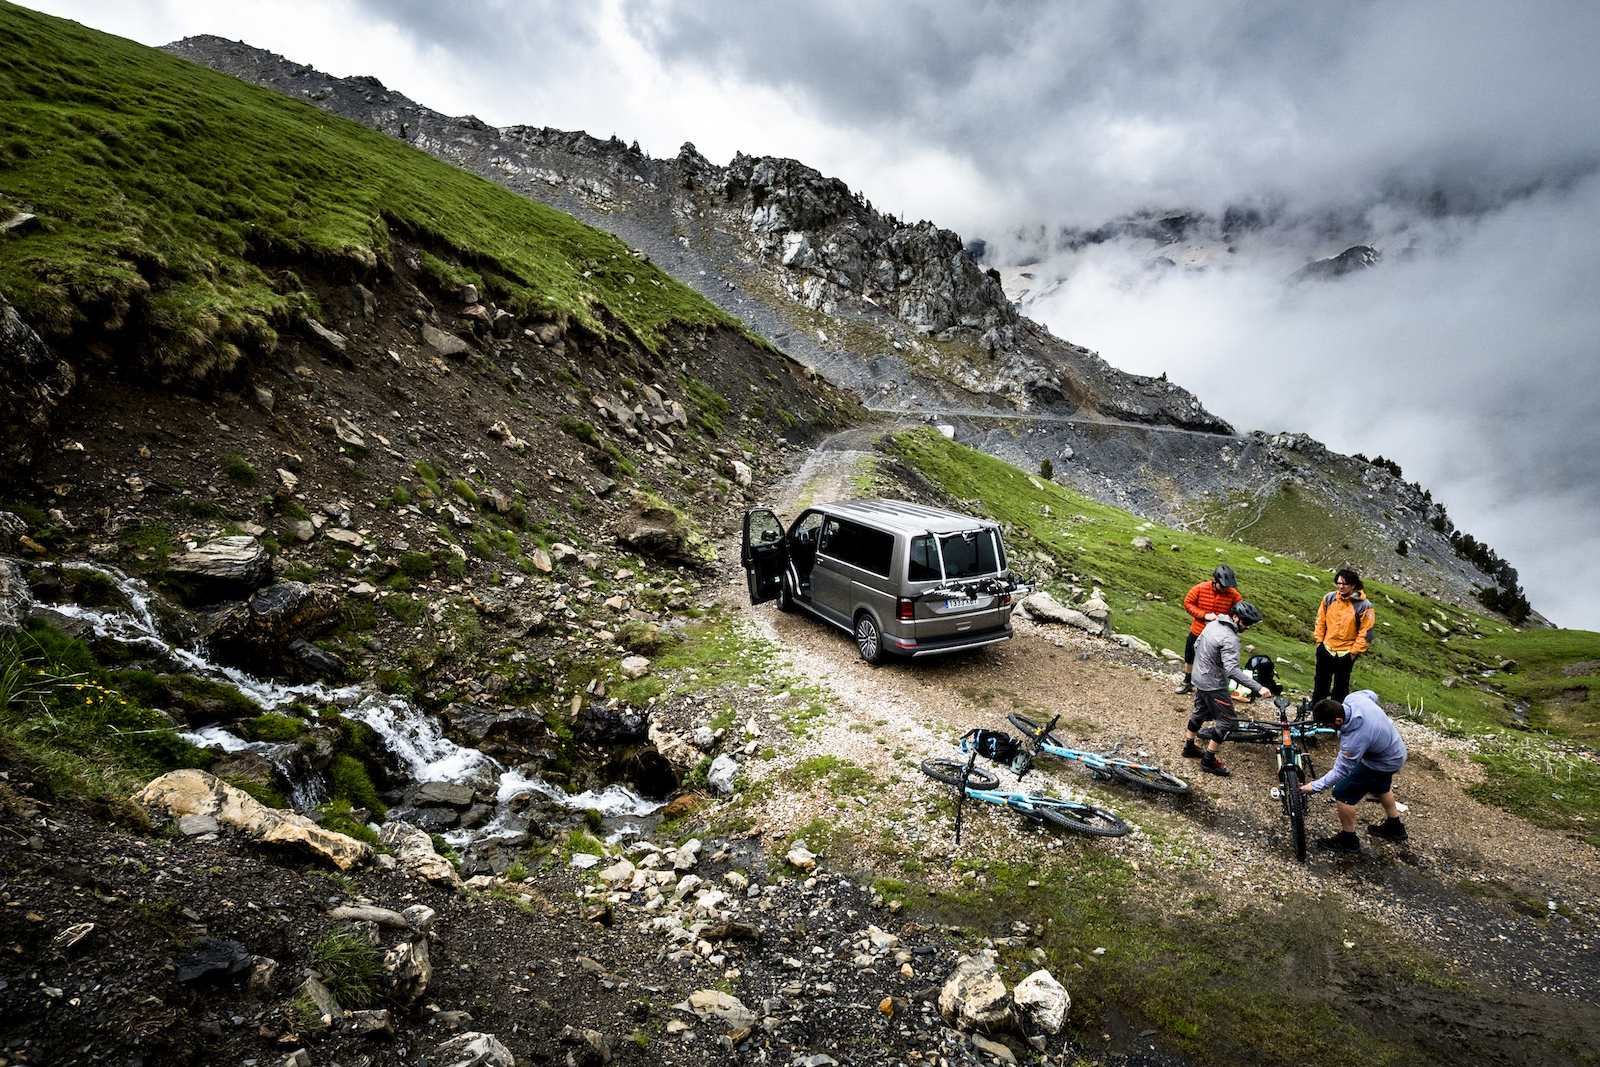 Putting the VW shuttle s offload capabilities through their paces to reach the Comodoto Peak trailhead.